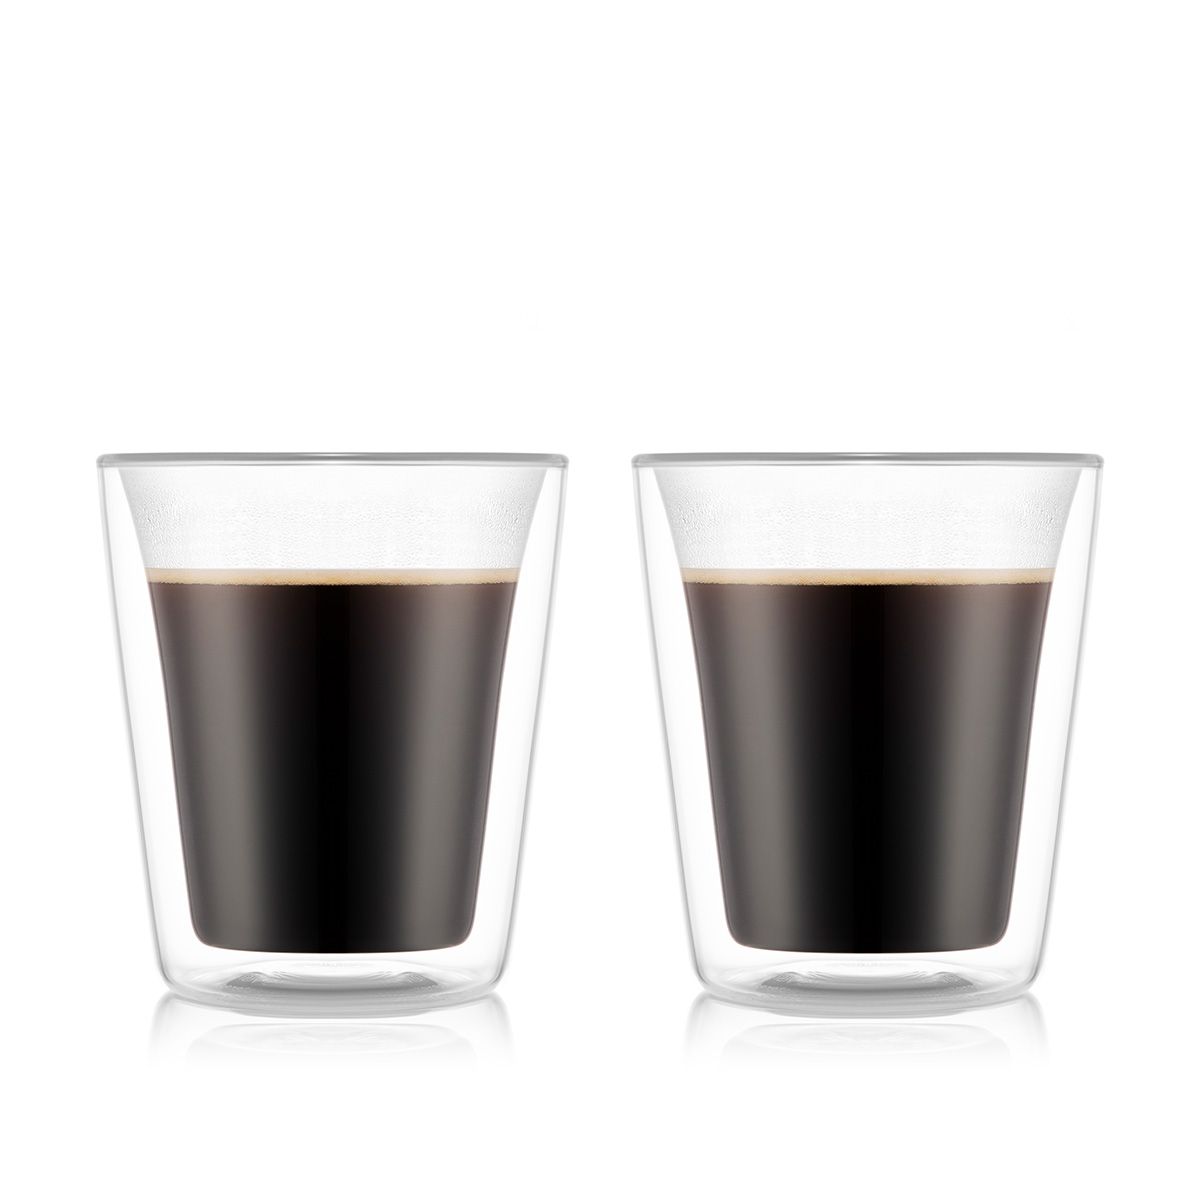 NEW Bodum Canteen Double Wall Thermo Glasses 400ml Set 2pce